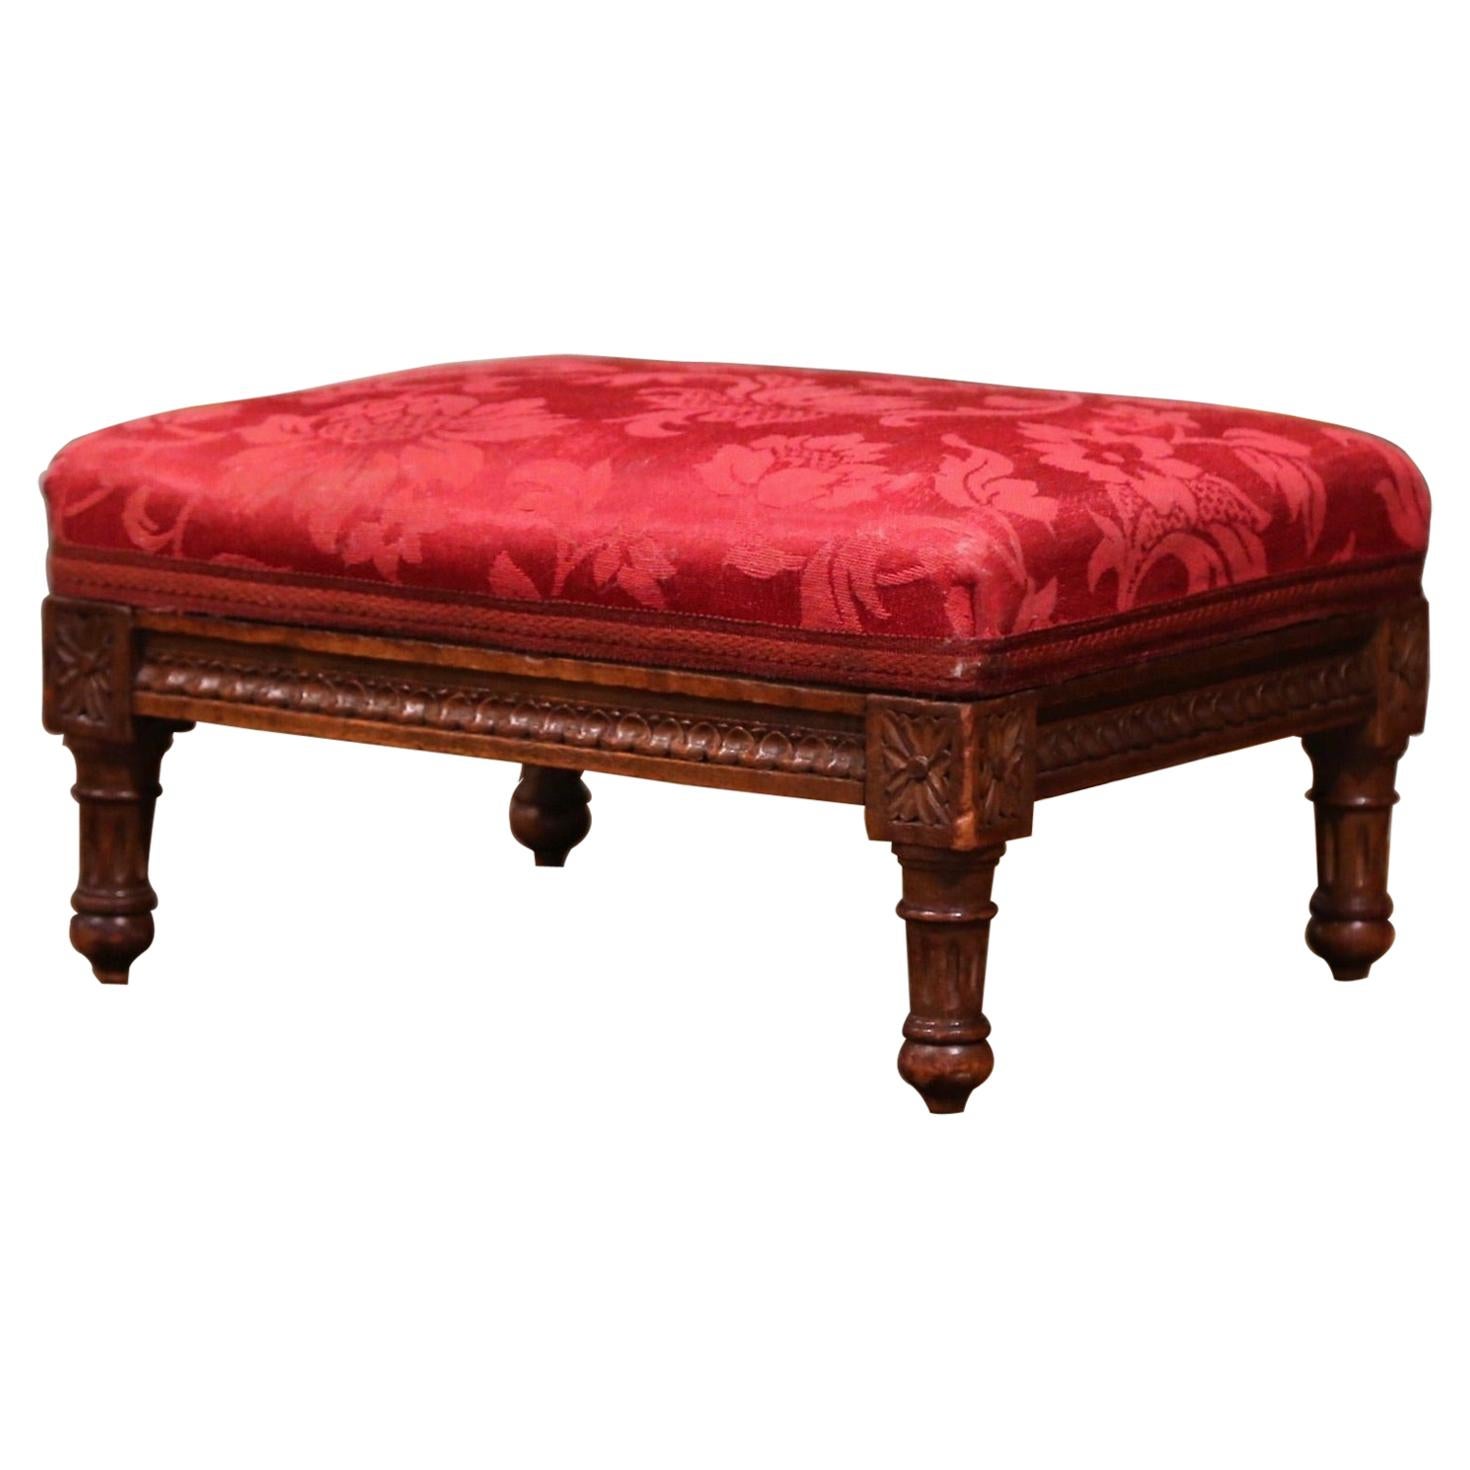 Early 20th Century French Walnut Footstool with Floral Silk Fabric